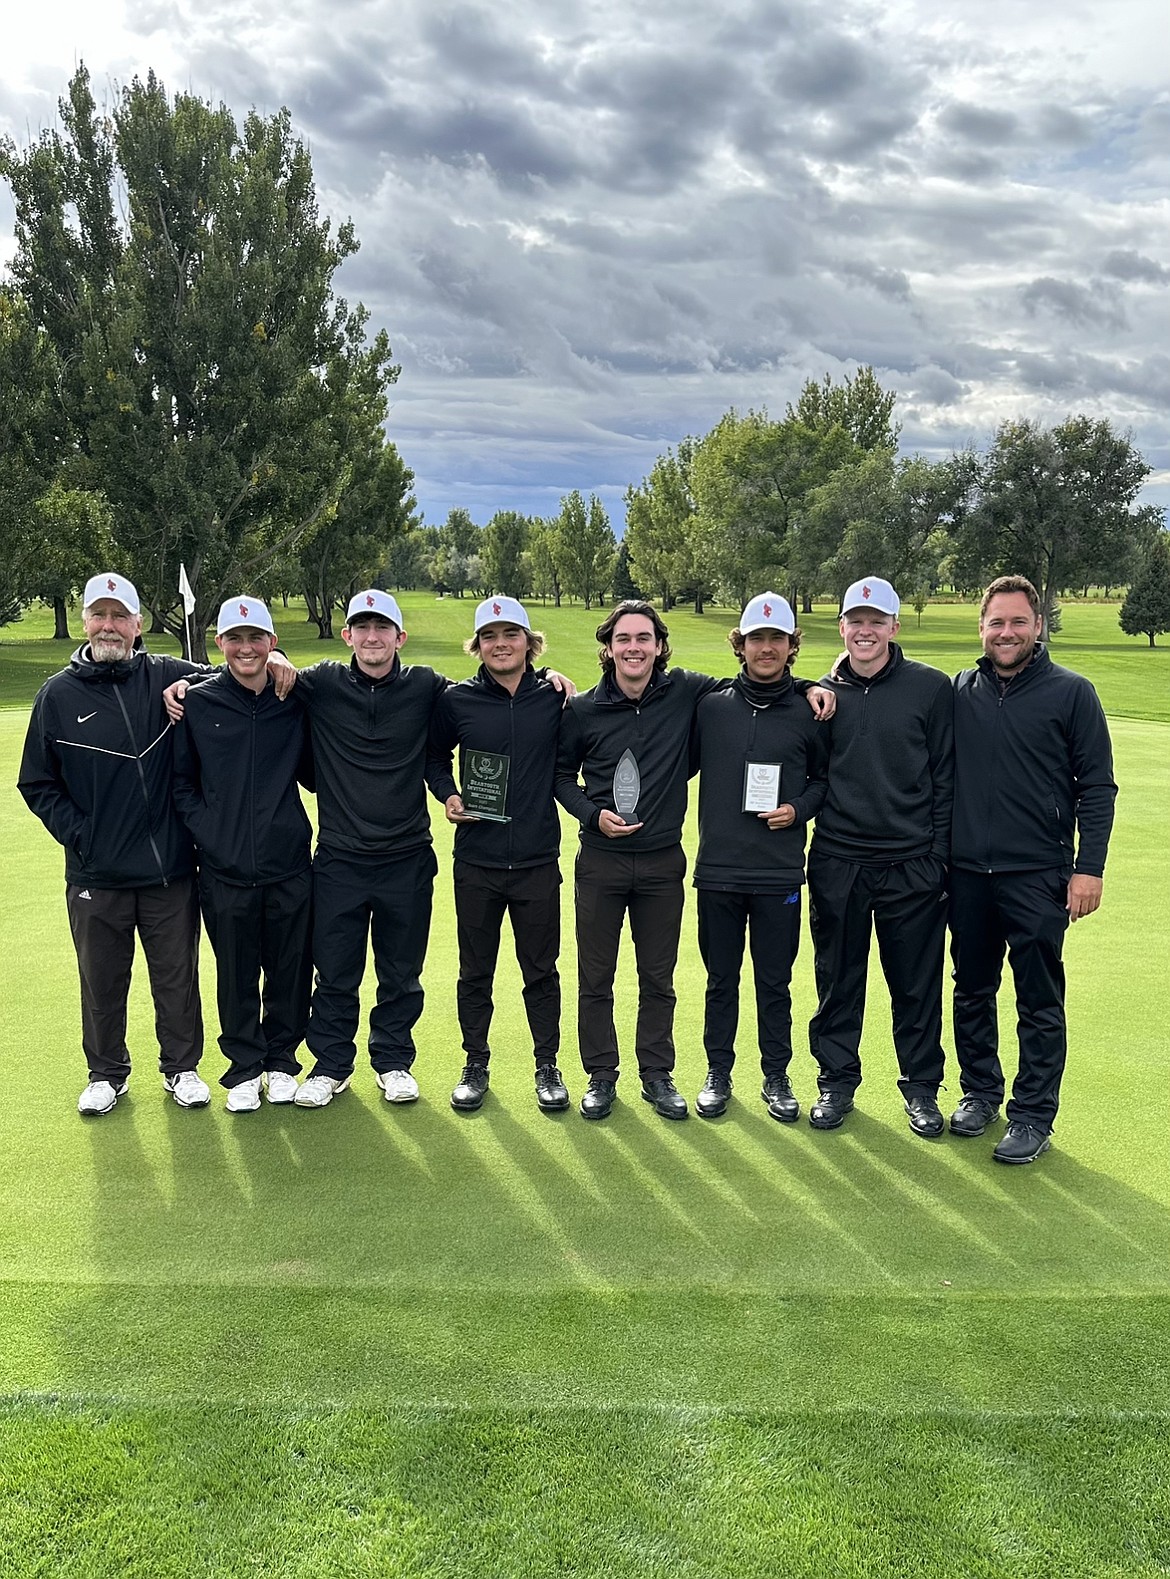 Courtesy photo
The North Idaho College men's golf team captures the team title at the Beartooth Invitational on Tuesday at Laurel Golf Club. The Cardinals were the only team to finish under par as a team, winning with an 856. From left are assistant coach Russ Grove, Dyson Lish, Caden Gambini, Charlie Terwilliger, Josh McCartain, Jarett Giles, Quinn Abbott and coach Russell Grove.